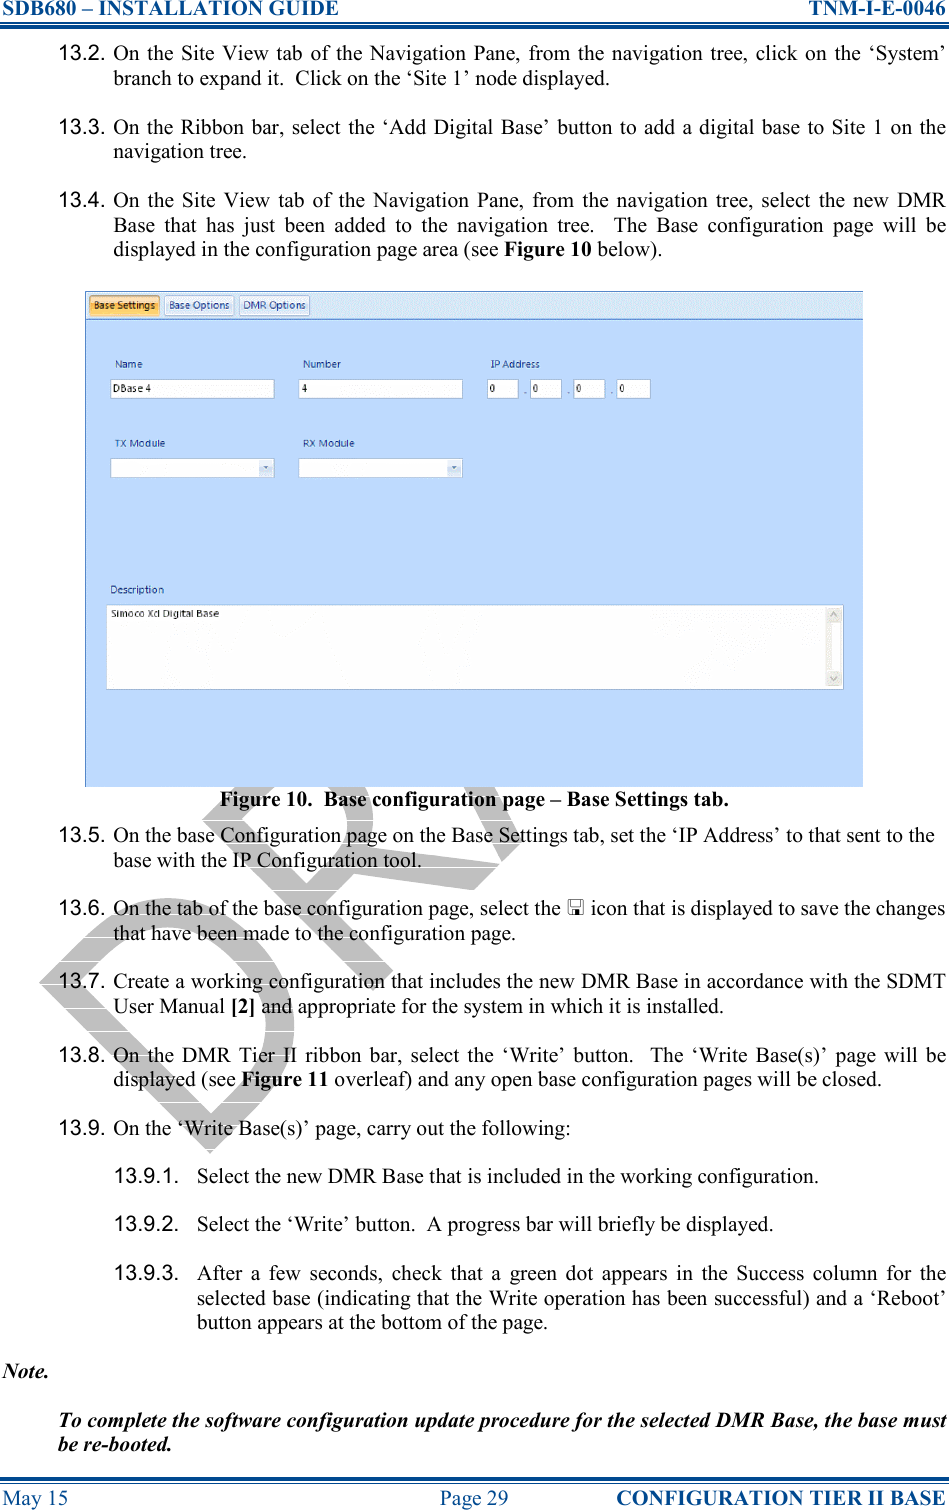 SDB680 – INSTALLATION GUIDE  TNM-I-E-0046 May 15  Page 29  CONFIGURATION TIER II BASE 13.2. On the Site View tab of the Navigation Pane, from the navigation tree, click on the ‘System’ branch to expand it.  Click on the ‘Site 1’ node displayed. 13.3. On the Ribbon bar, select the ‘Add Digital Base’ button to add a digital base to Site 1 on the navigation tree. 13.4. On  the  Site View  tab  of  the  Navigation  Pane,  from  the navigation  tree, select  the  new  DMR Base  that  has  just  been  added  to  the  navigation  tree.    The  Base  configuration  page  will  be displayed in the configuration page area (see Figure 10 below). Figure 10.  Base configuration page – Base Settings tab. 13.5. On the base Configuration page on the Base Settings tab, set the ‘IP Address’ to that sent to the base with the IP Configuration tool. 13.6. On the tab of the base configuration page, select the  icon that is displayed to save the changes that have been made to the configuration page. 13.7. Create a working configuration that includes the new DMR Base in accordance with the SDMT User Manual [2] and appropriate for the system in which it is installed. 13.8. On  the  DMR  Tier  II  ribbon bar,  select the  ‘Write’  button.    The  ‘Write  Base(s)’  page will  be displayed (see Figure 11 overleaf) and any open base configuration pages will be closed. 13.9. On the ‘Write Base(s)’ page, carry out the following: 13.9.1.  Select the new DMR Base that is included in the working configuration. 13.9.2.  Select the ‘Write’ button.  A progress bar will briefly be displayed. 13.9.3.  After  a  few  seconds,  check  that  a  green  dot  appears  in  the  Success  column  for  the selected base (indicating that the Write operation has been successful) and a ‘Reboot’ button appears at the bottom of the page. Note. To complete the software configuration update procedure for the selected DMR Base, the base must be re-booted. 